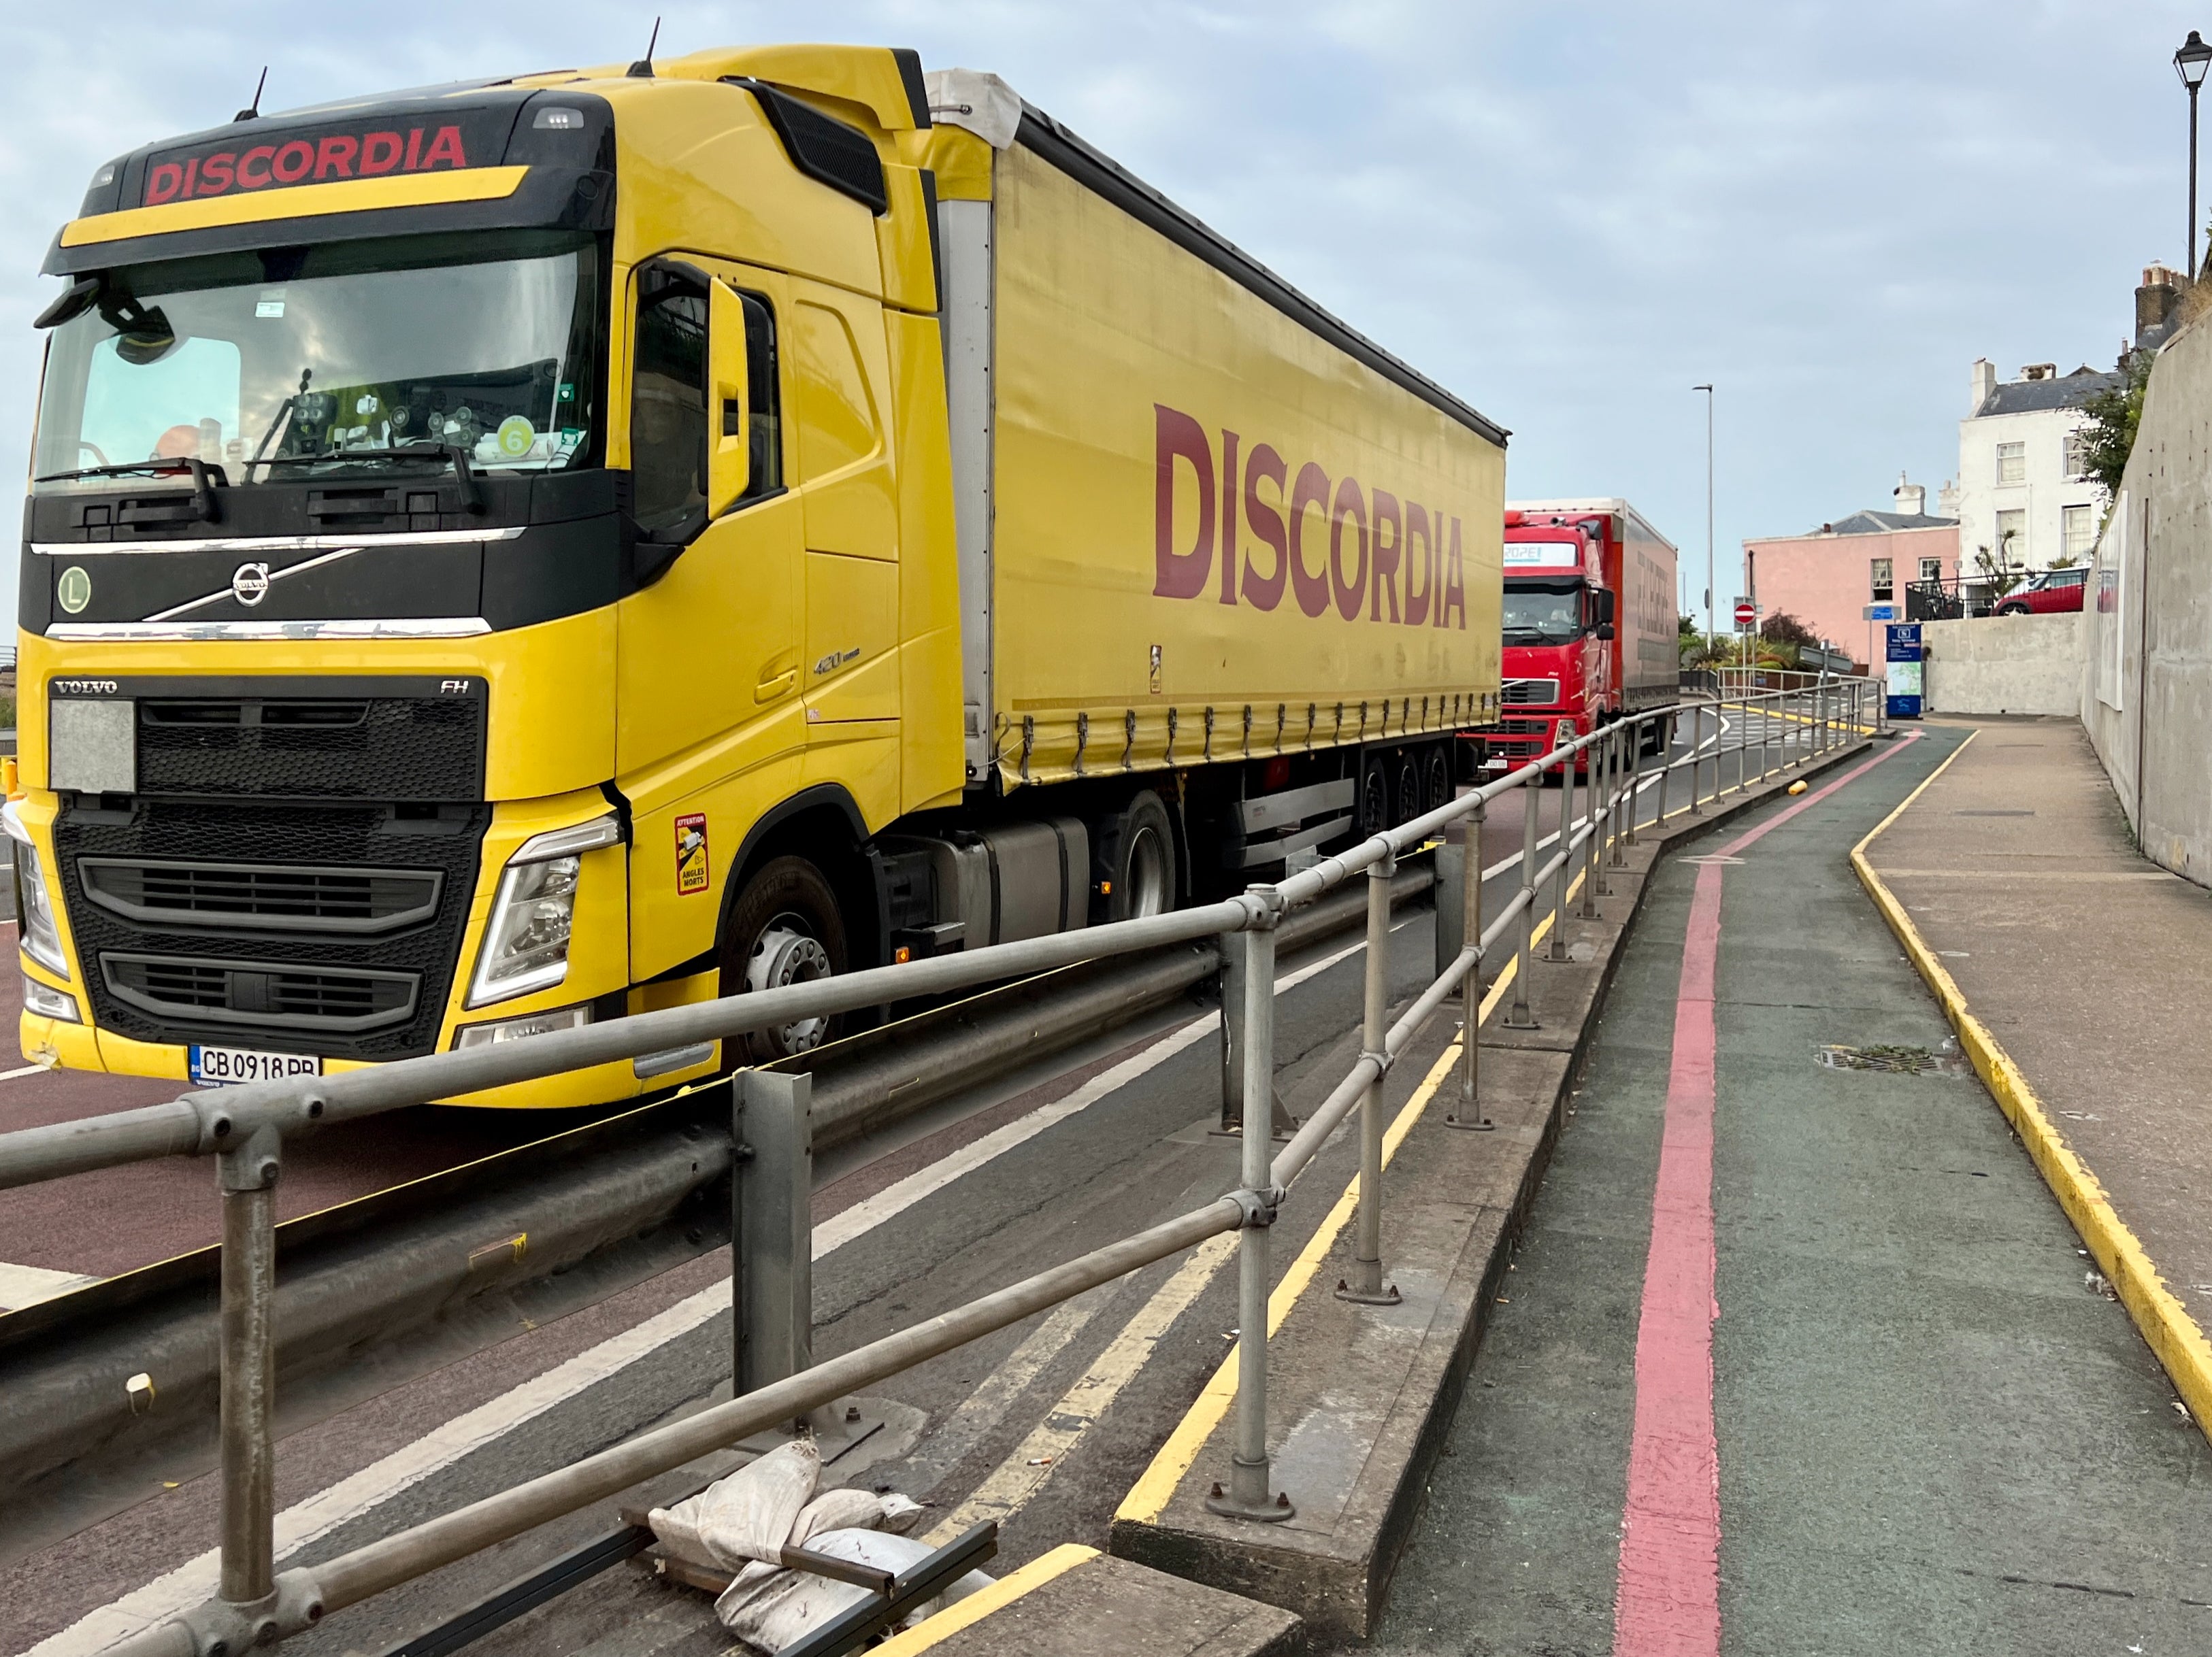 Discord at Dover: a Bulgarian truck queuing for French frontier formalities at the Kent port